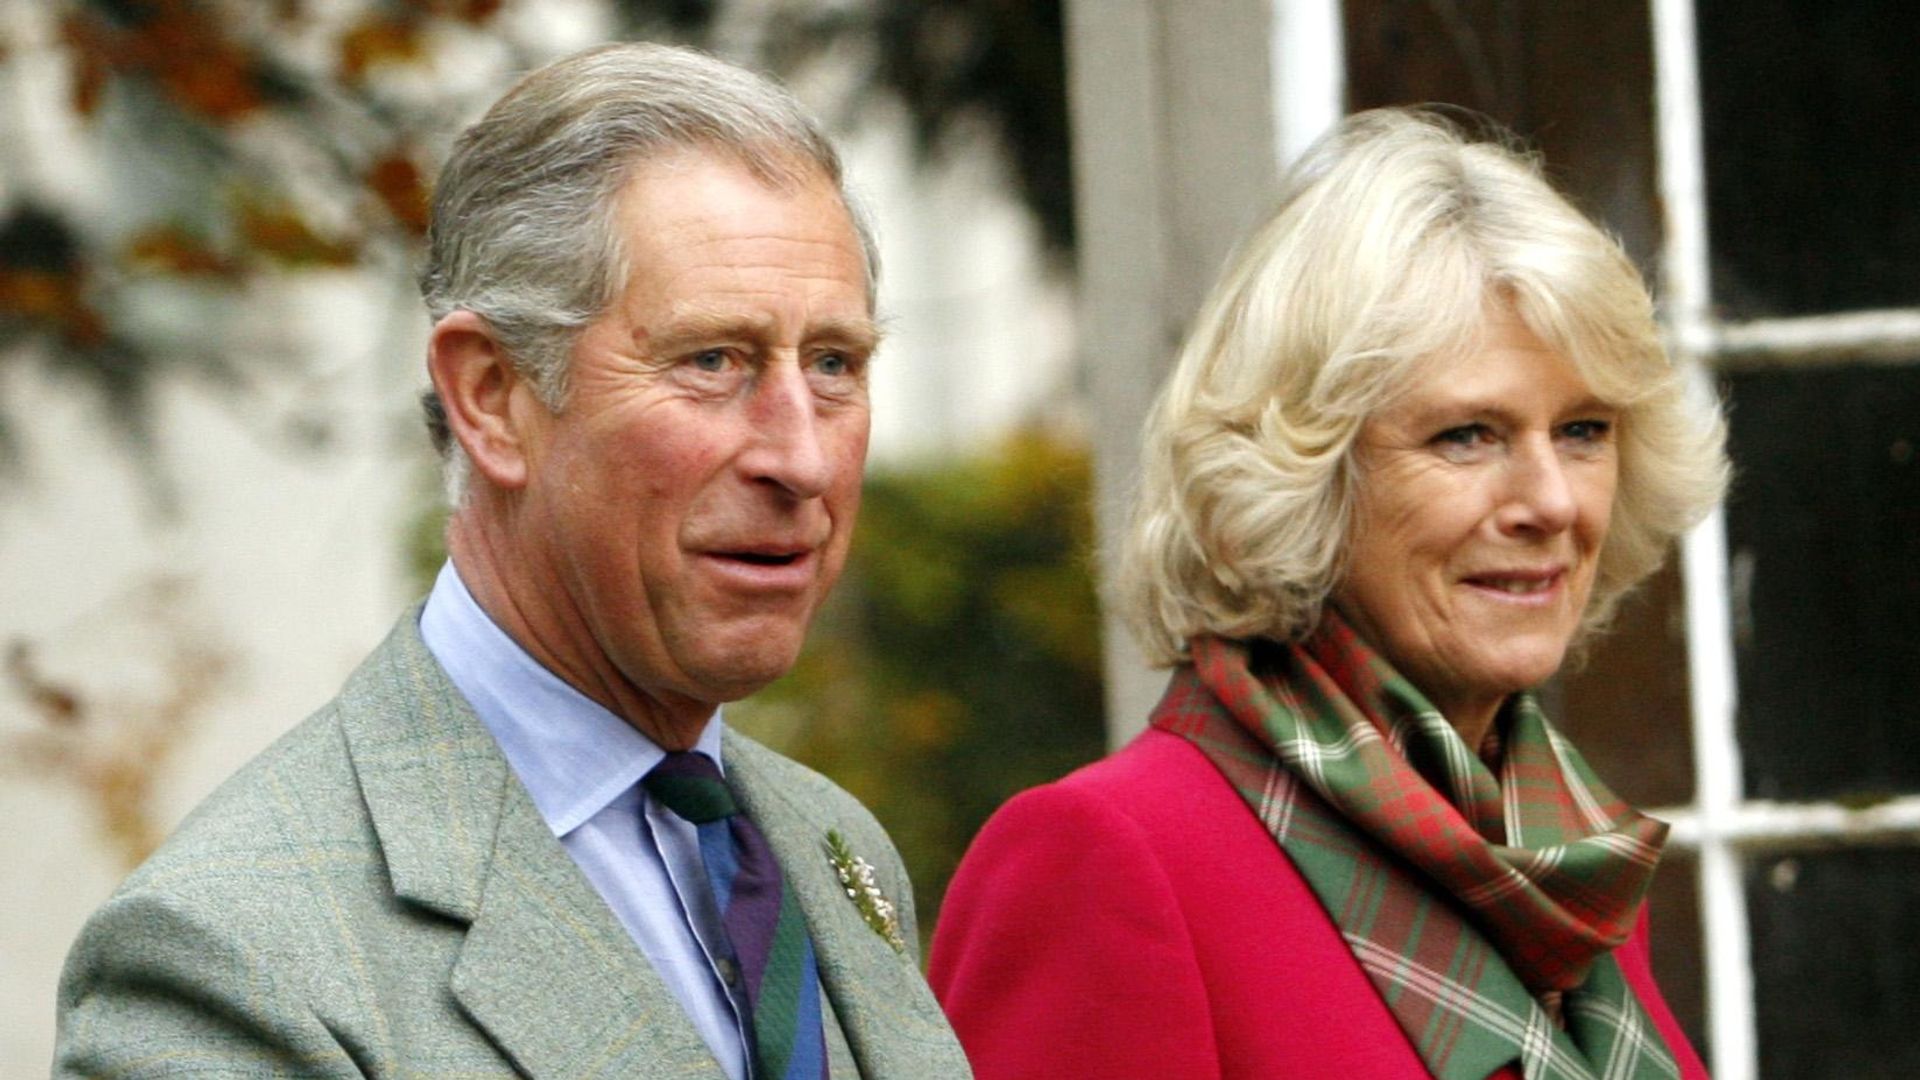 Prince Charles, Prince of Wales and Camilla, Duchess of Cornwall at their Scottish home, Birkhall, on October 21, 2007 in Balmoral, Scotland.